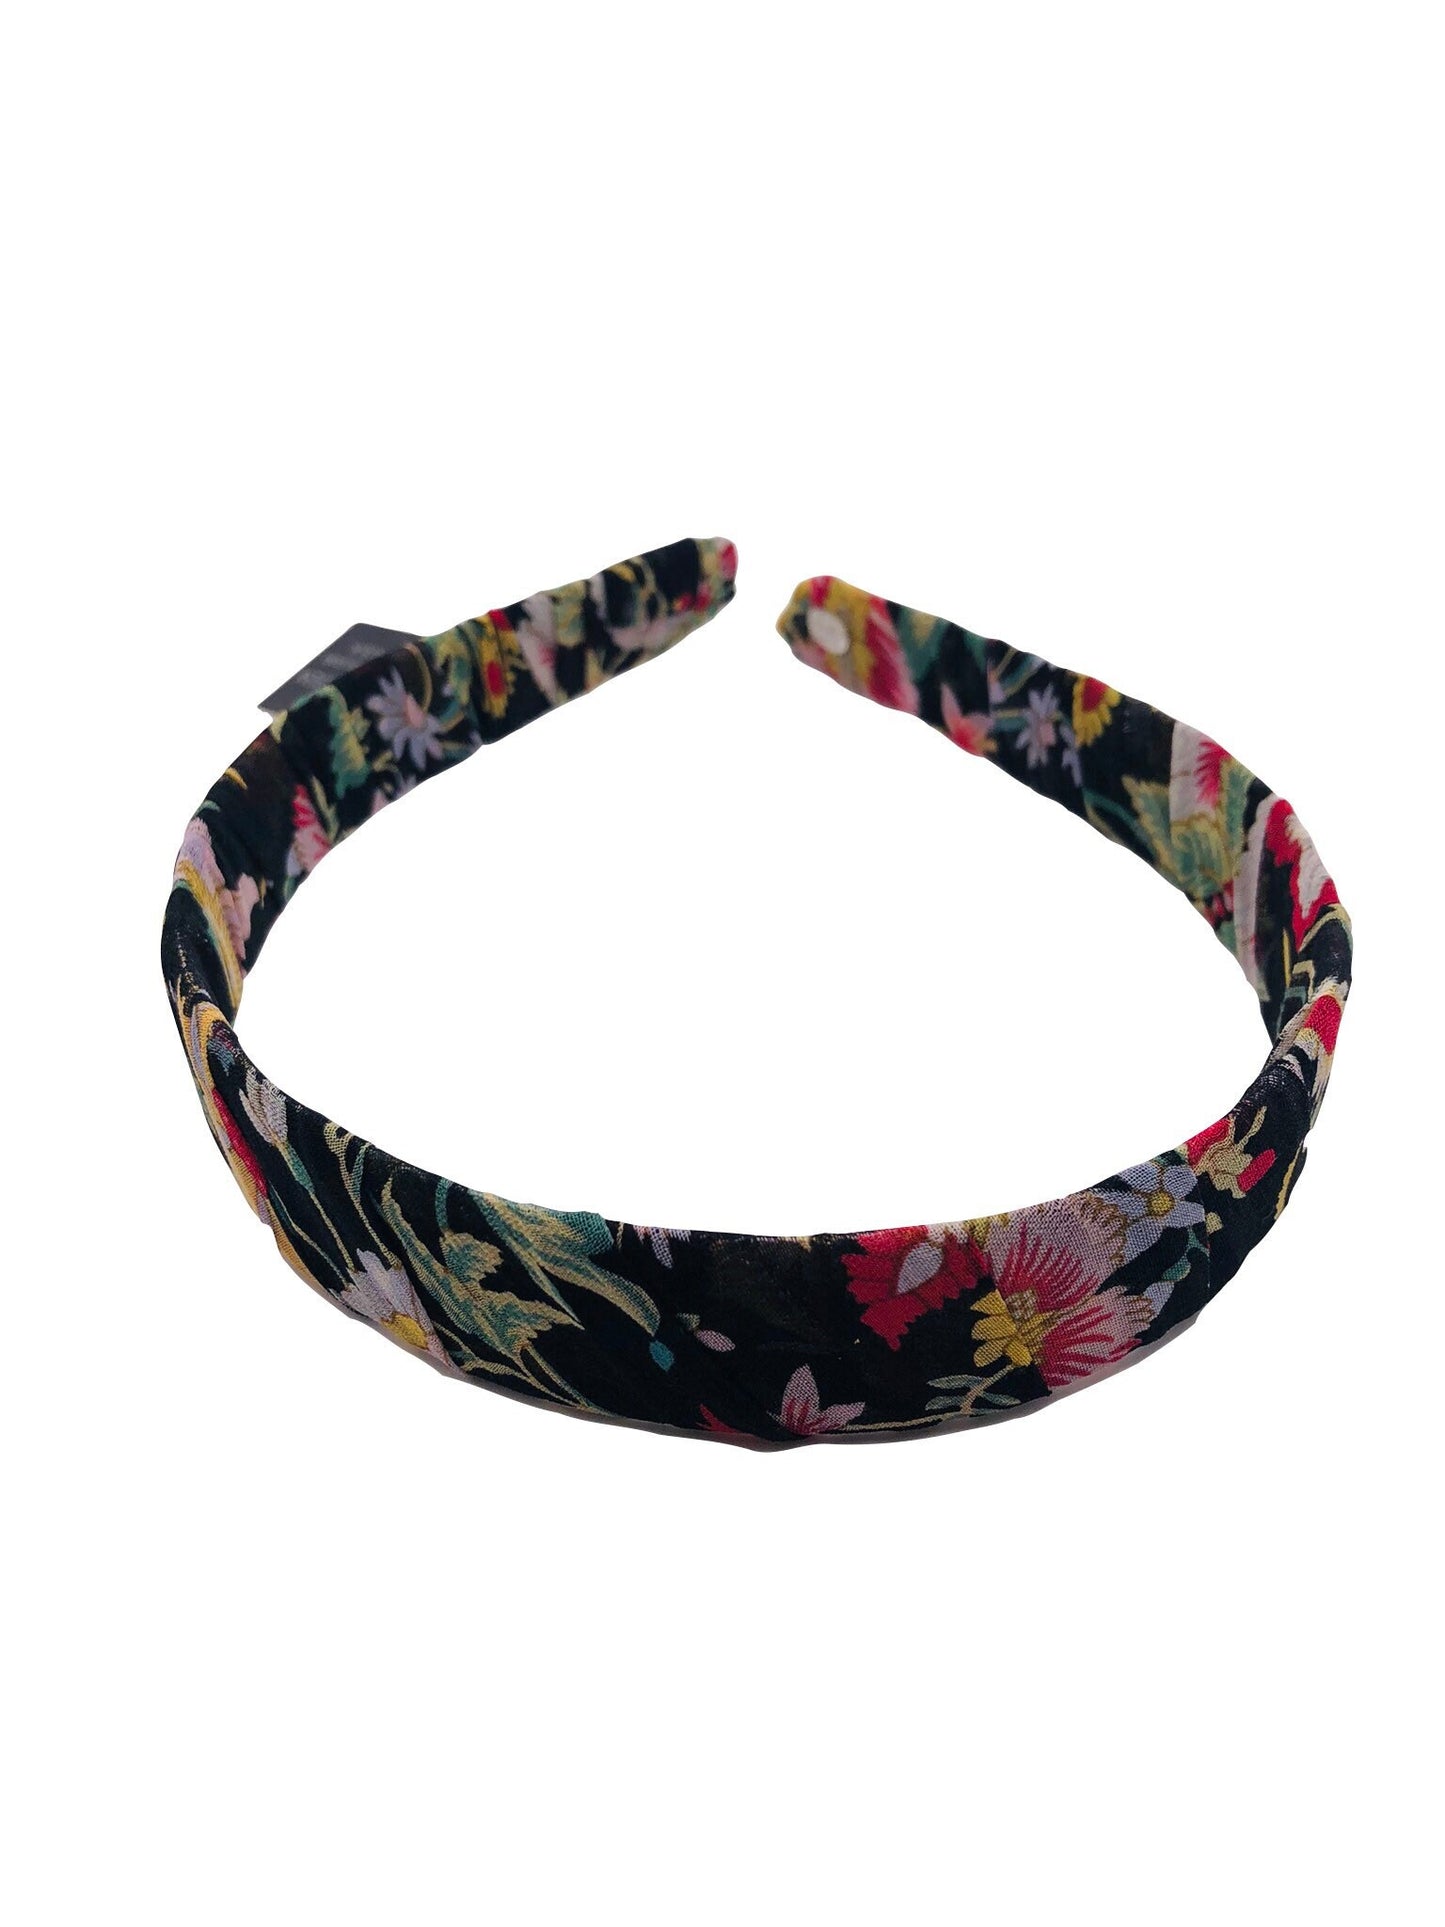 Karin's Garden 1" Silk Chiffon Floral Headband.  Handmade in the USA.  In white floral or black floral